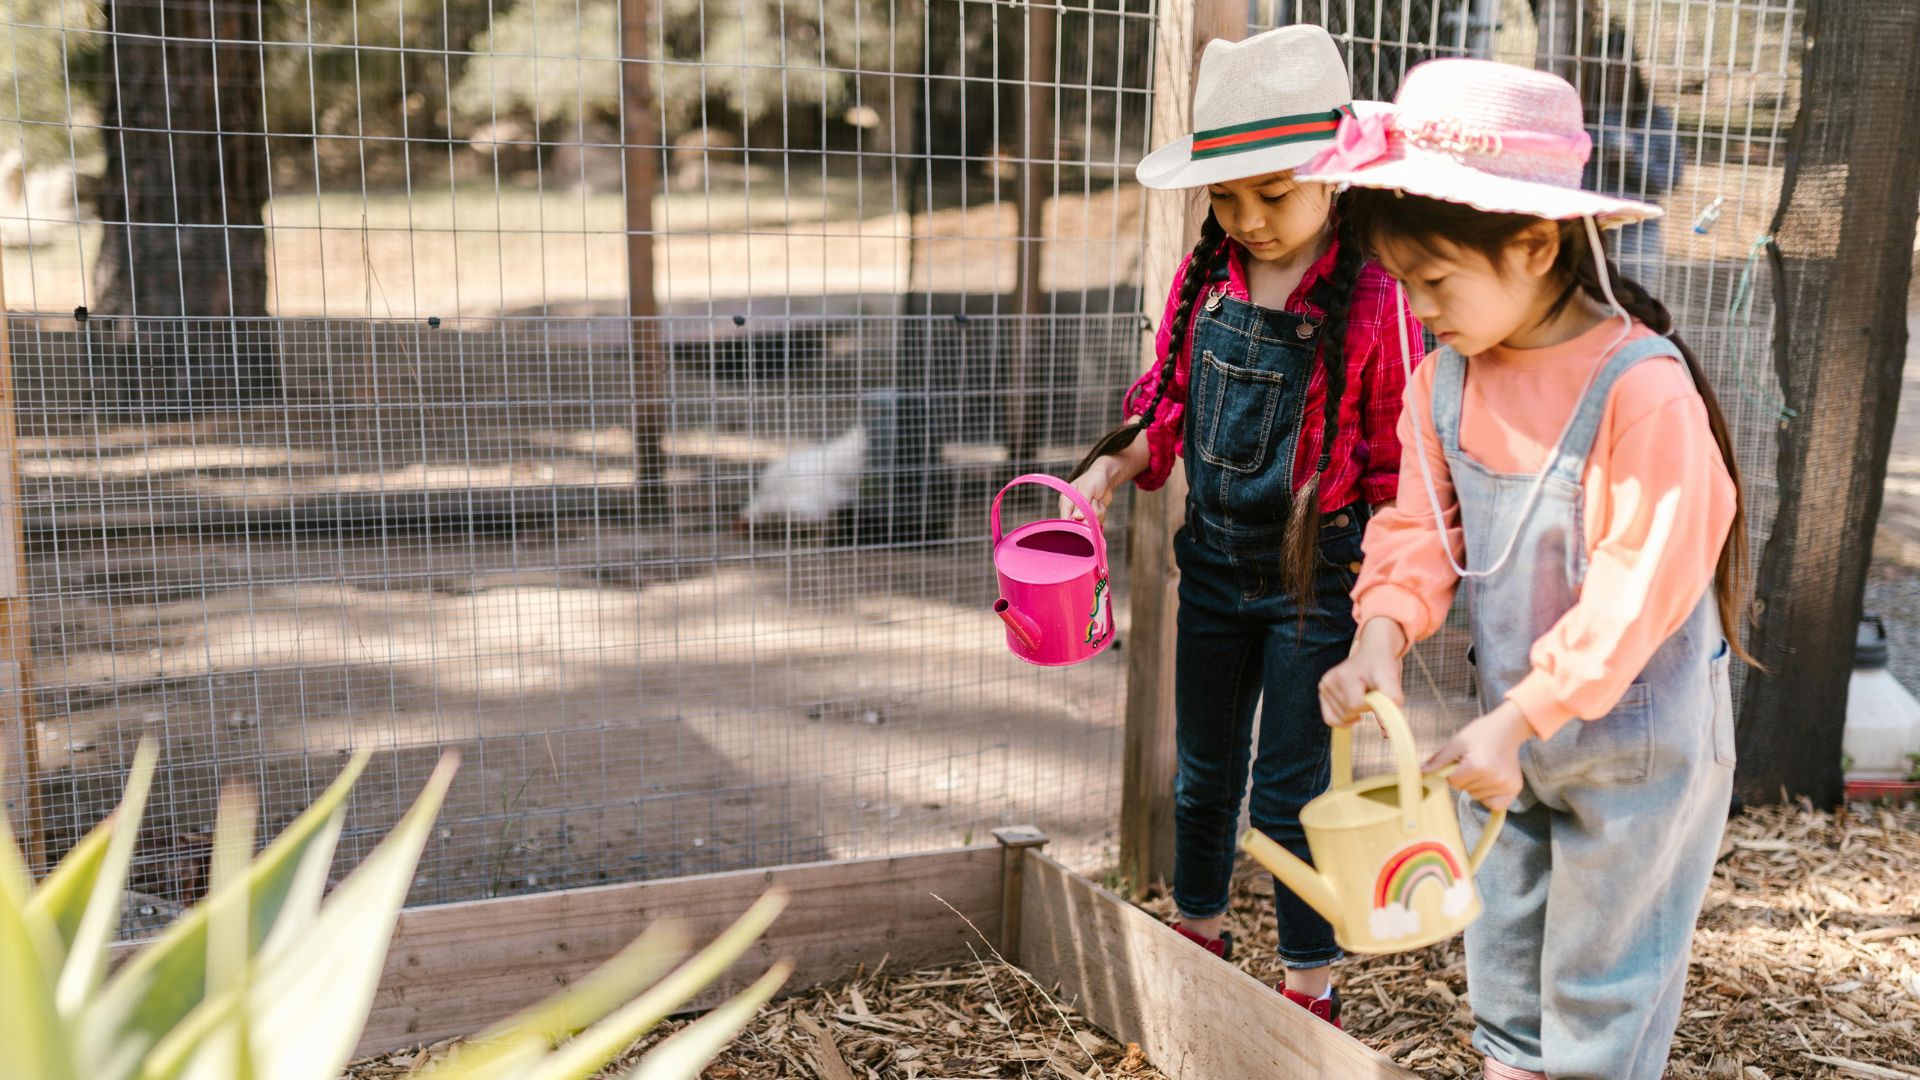 Two young girls in brightly colored hats water a garden in their backyard.